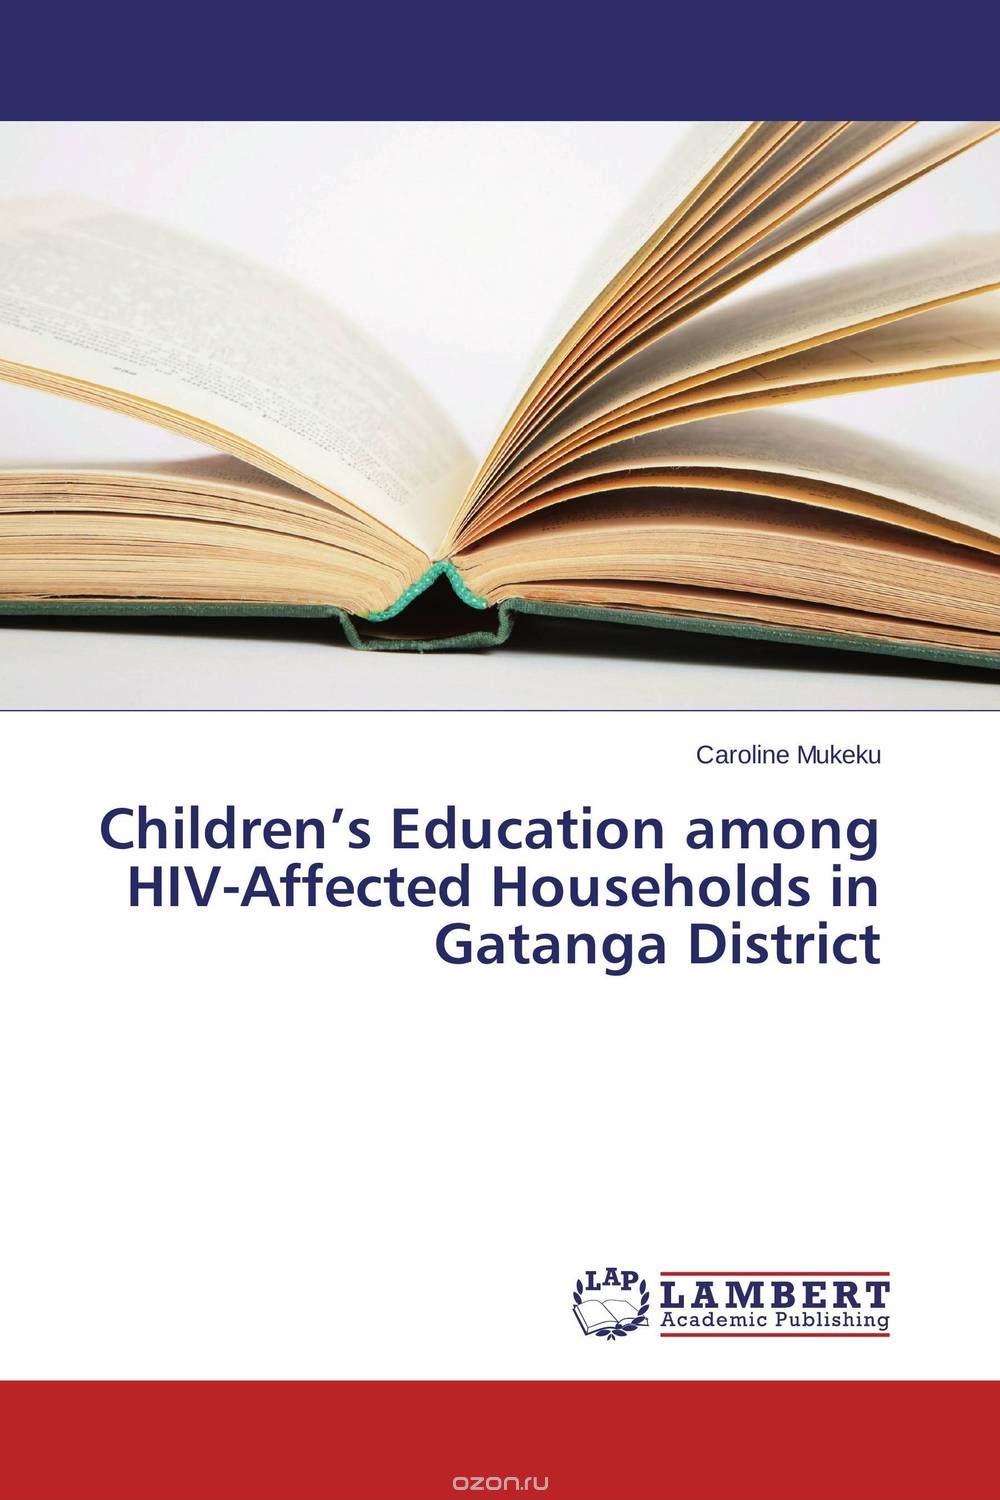 Children’s Education among HIV-Affected Households in Gatanga District